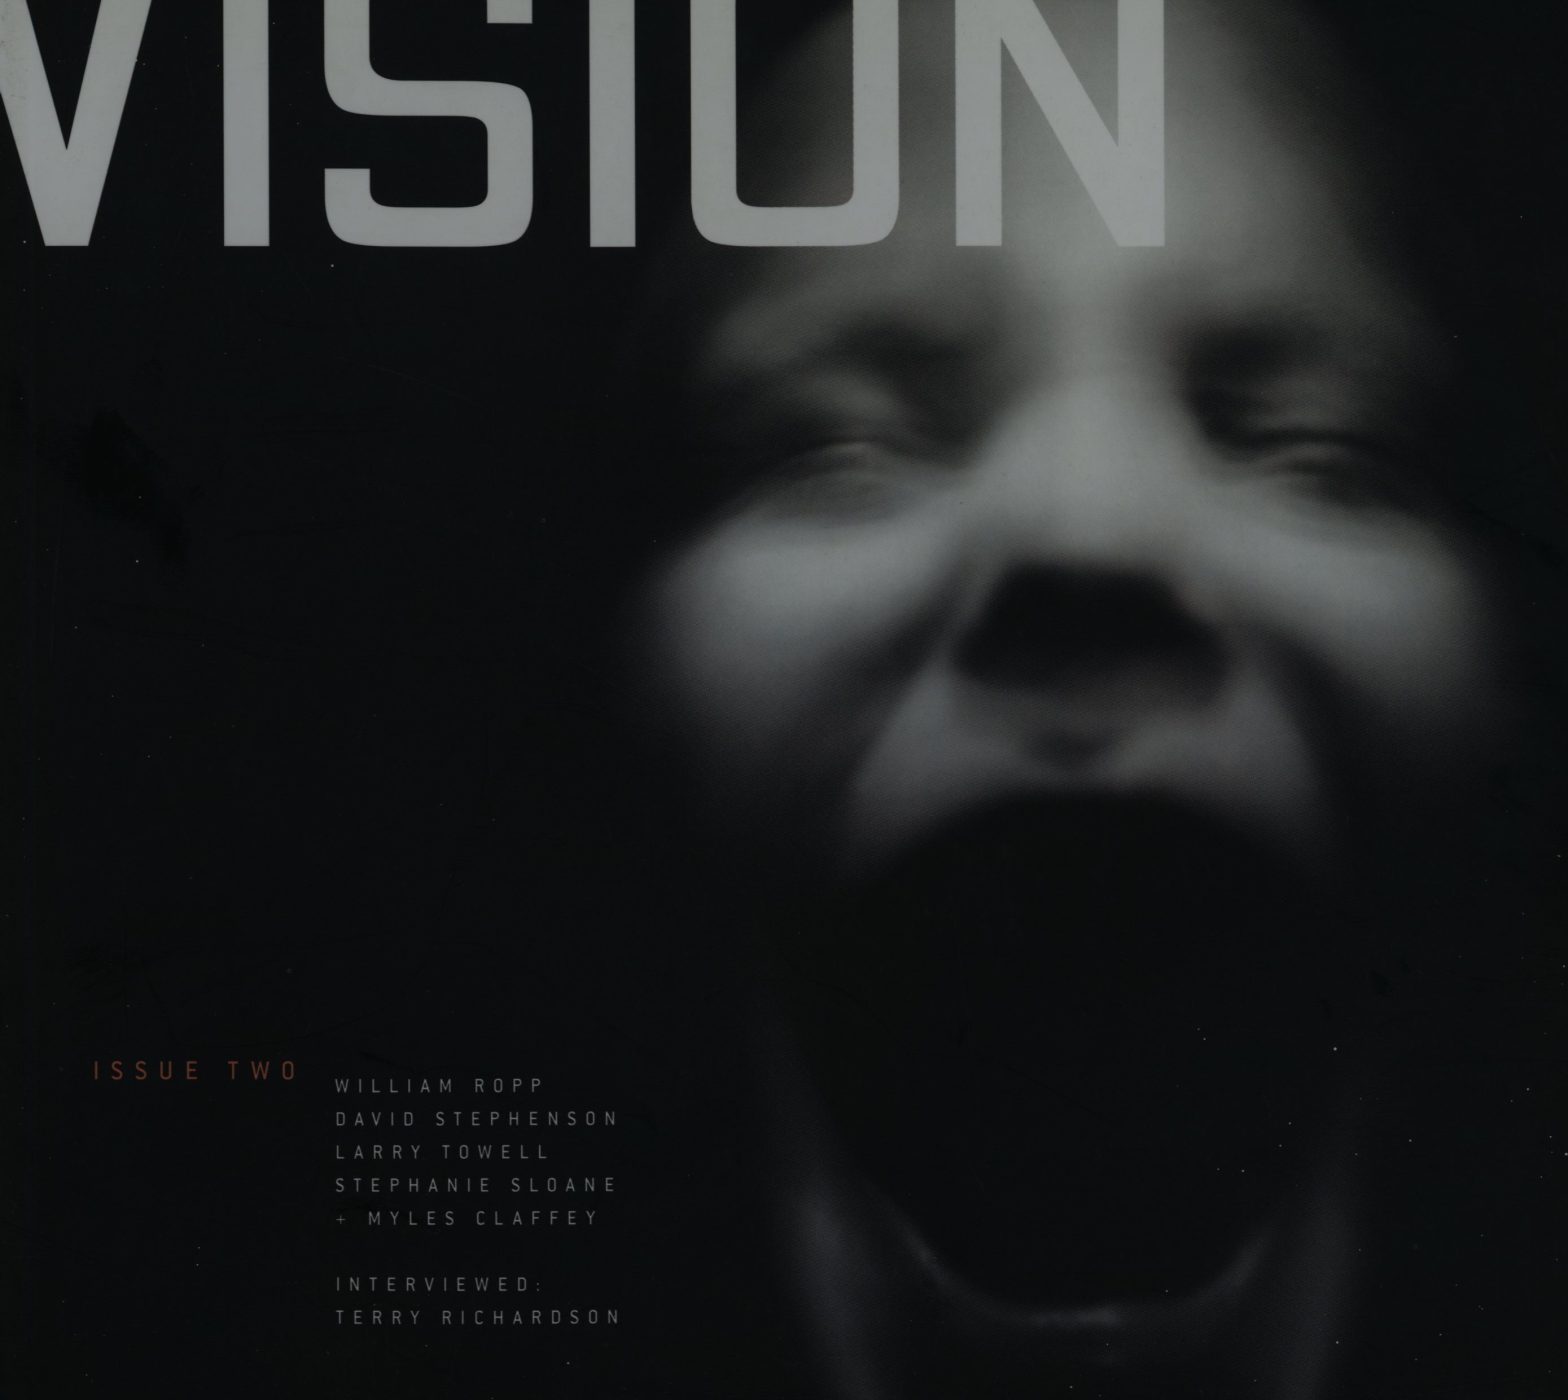 VISION Issue Two